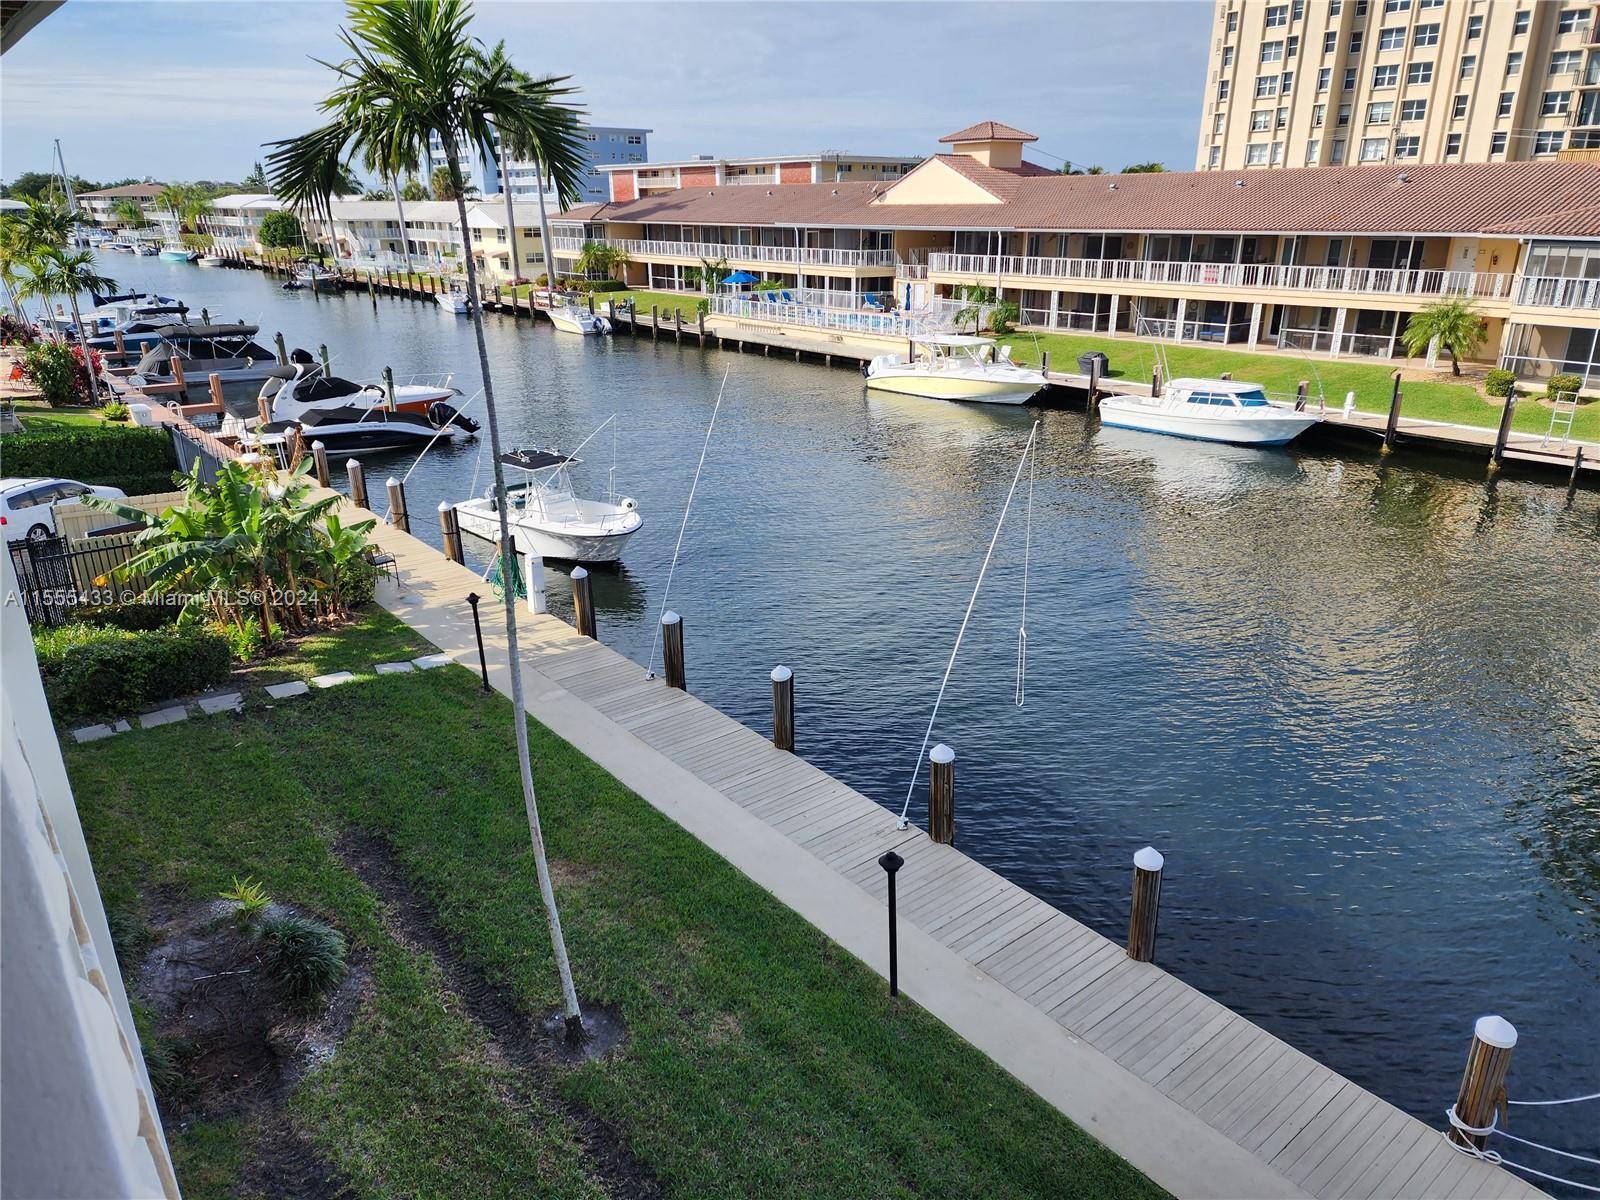 Great Unit with a Great Location just 10 minutes' walk to the beach, Restaurants, shopping centers, 5 minutes' drive to Lauderdale by the Sea, 5 minutes' Drive to Las Olas ...